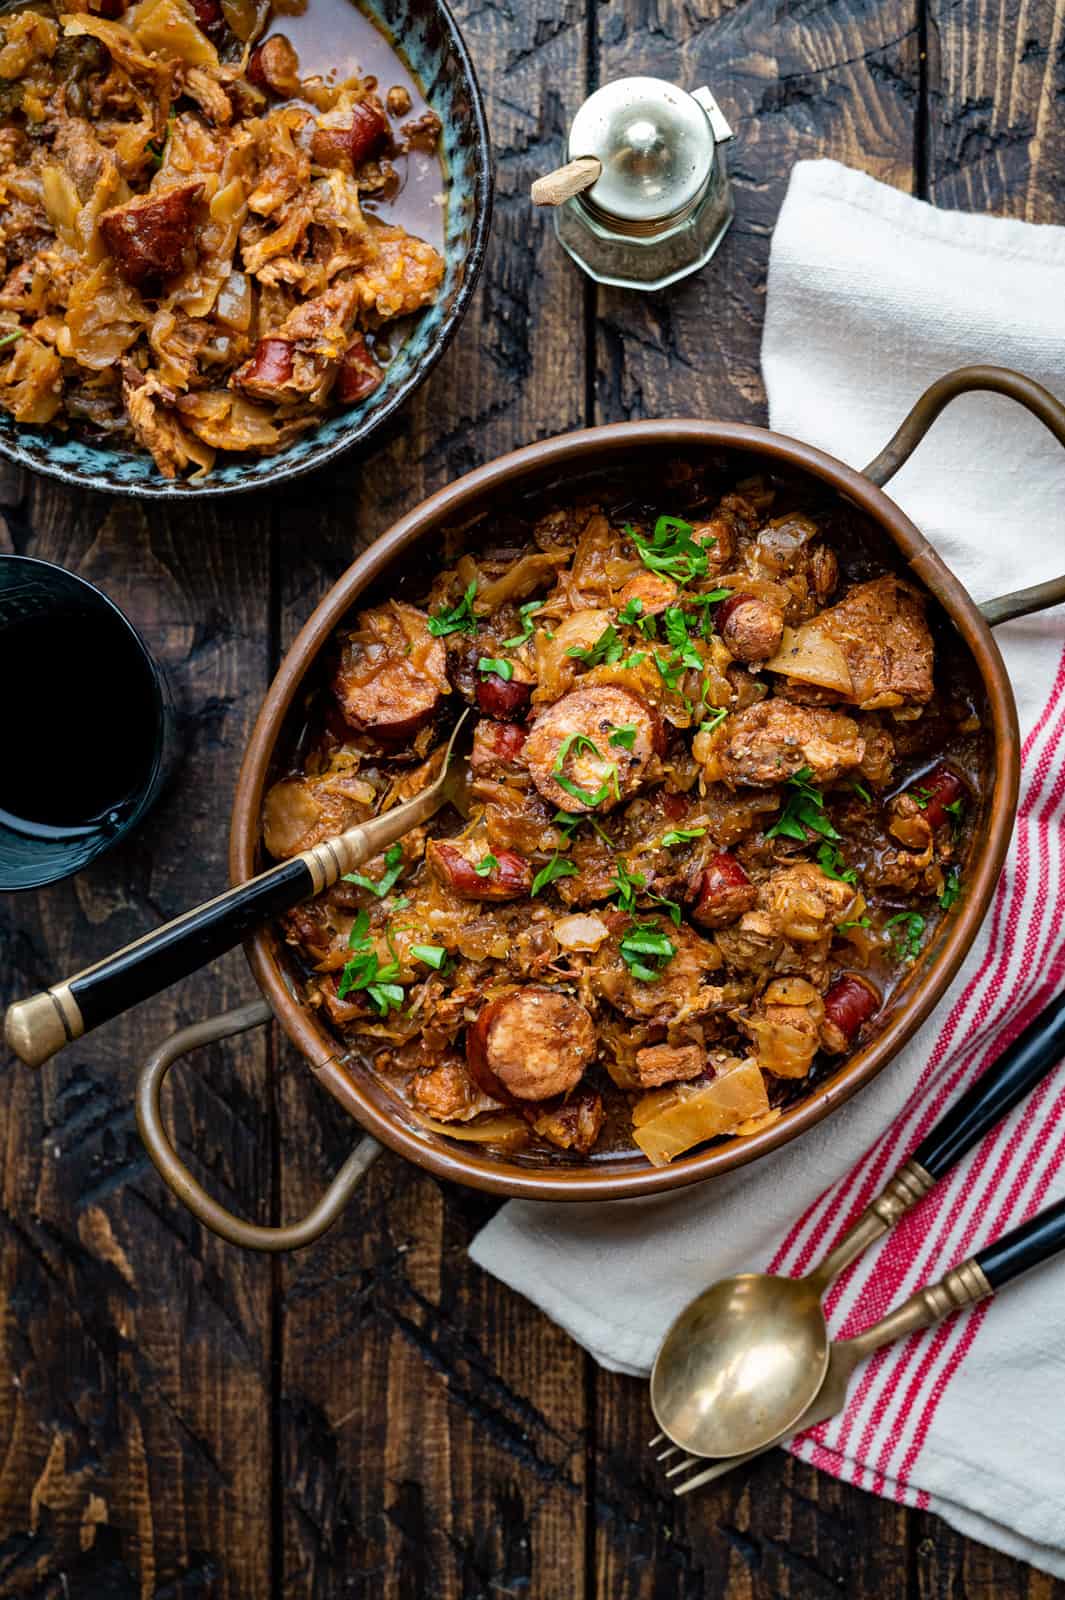 Polish Bigos Stew in a rustic copper casserole with a serving on the side